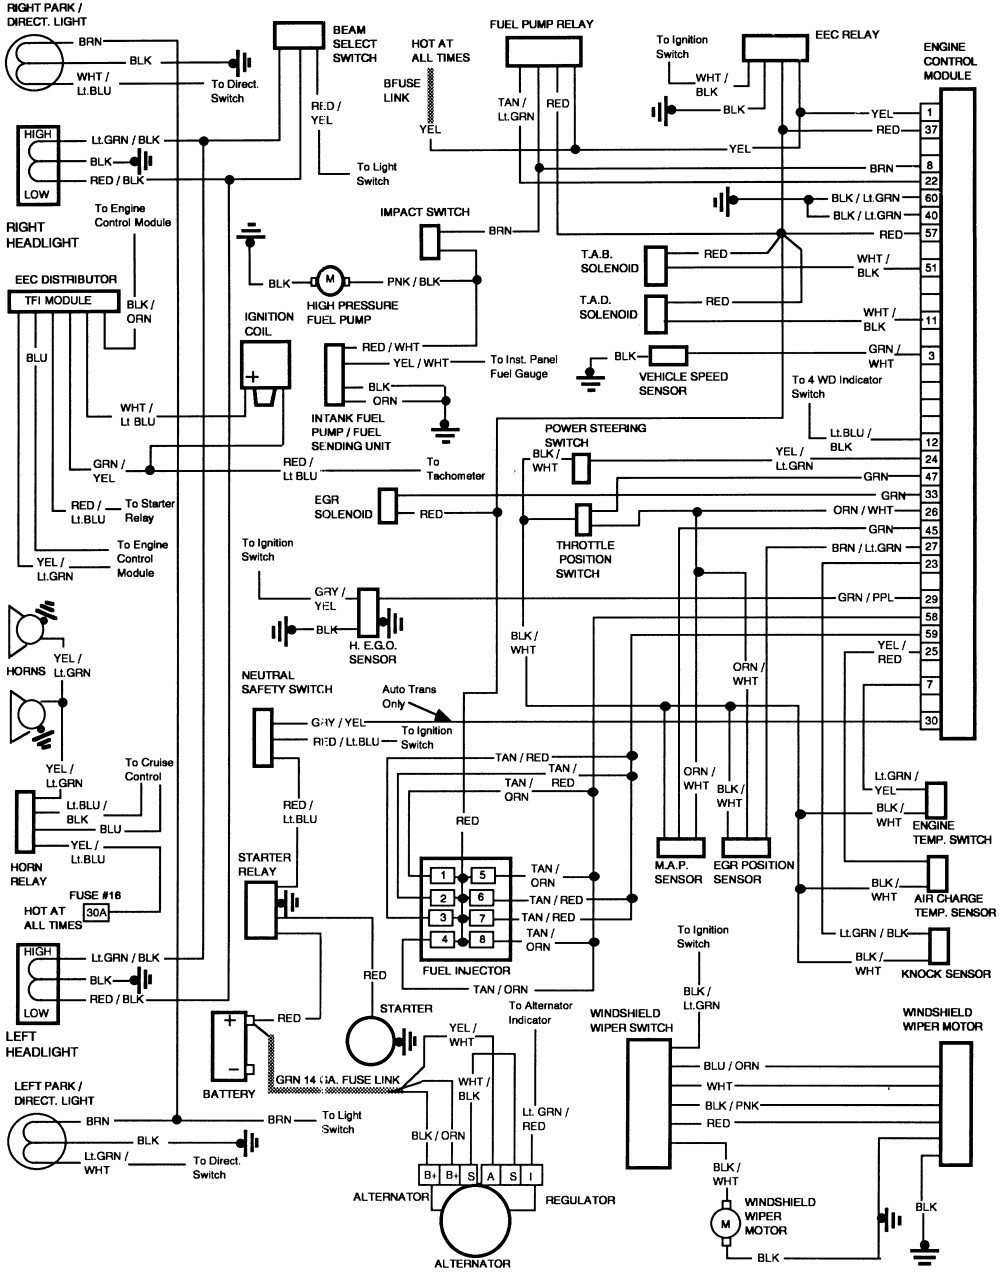 2008 ford Upfitter Switches Wiring Diagram Beautiful ford F 350 Super Duty Wiring Diagram